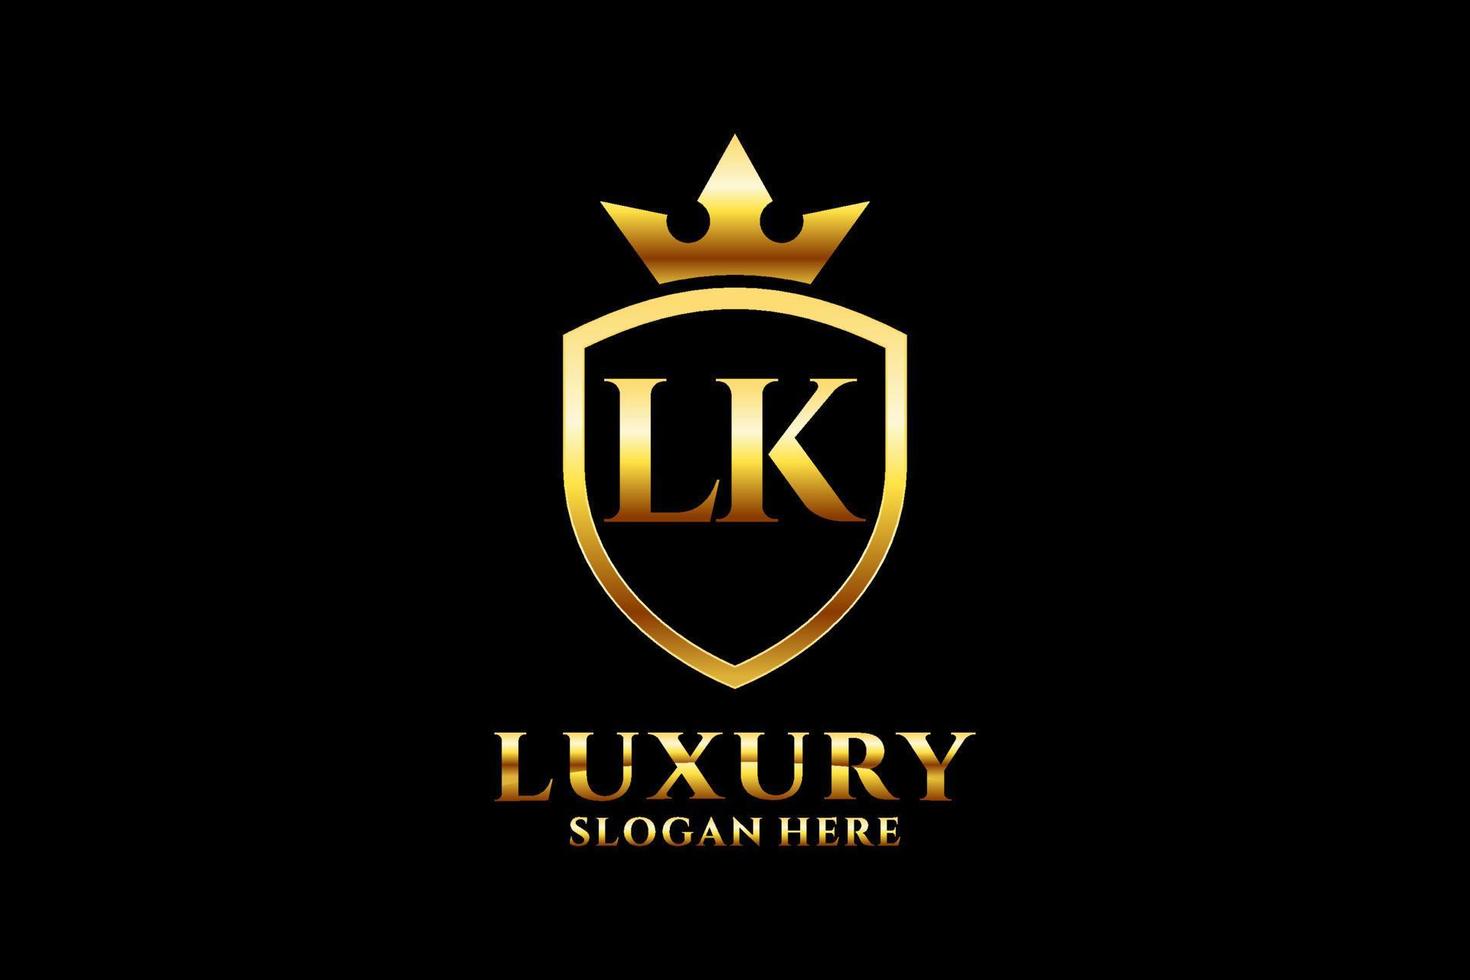 initial LK elegant luxury monogram logo or badge template with scrolls and royal crown - perfect for luxurious branding projects vector